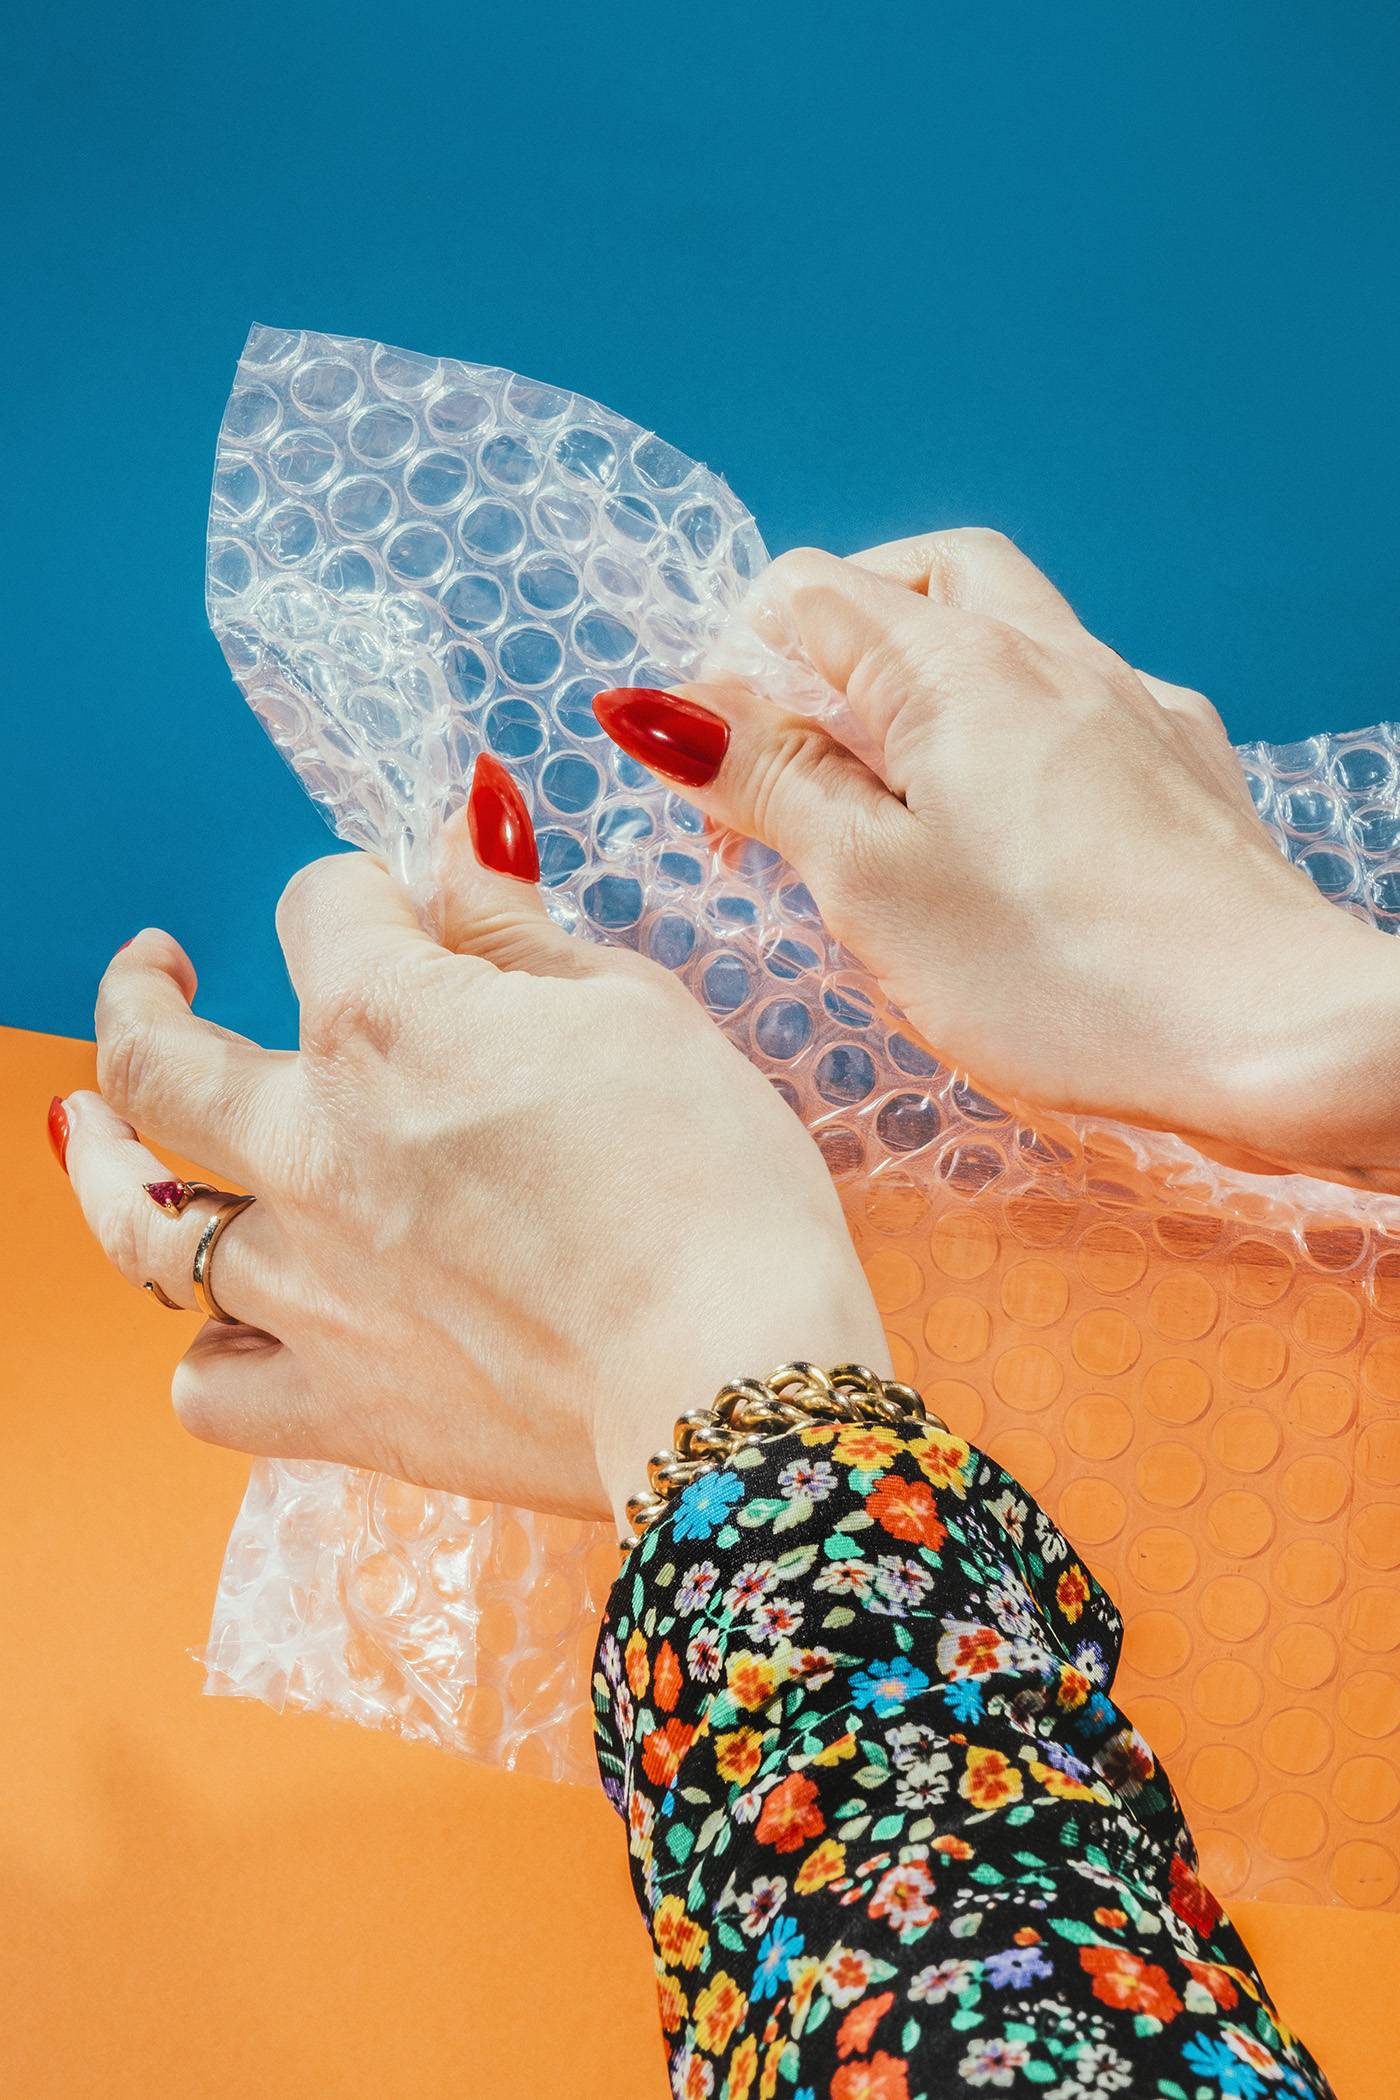 Female Hands Popping Bubbles On Bubble Wrap.